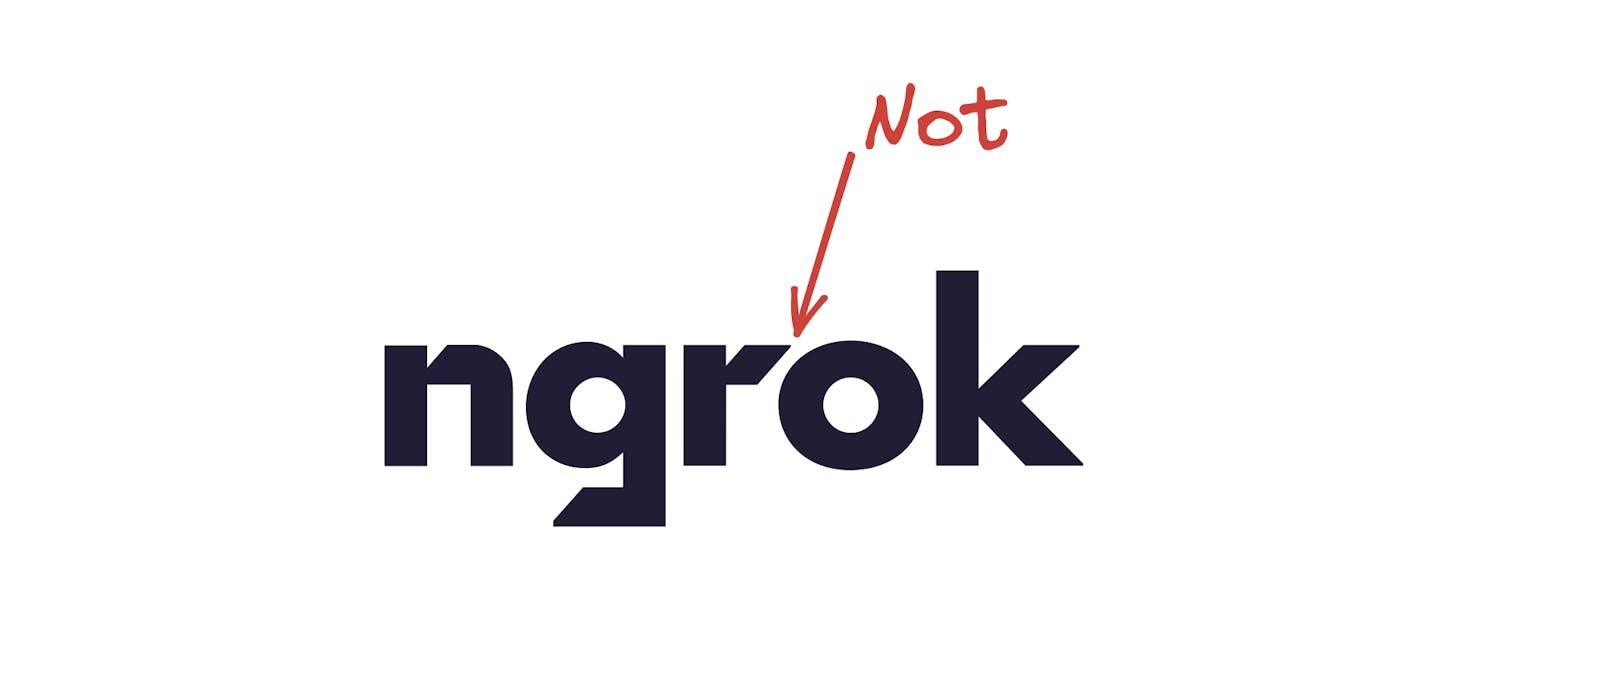 Creating a working ngrok from scratch using Rust and Go [Part 1]